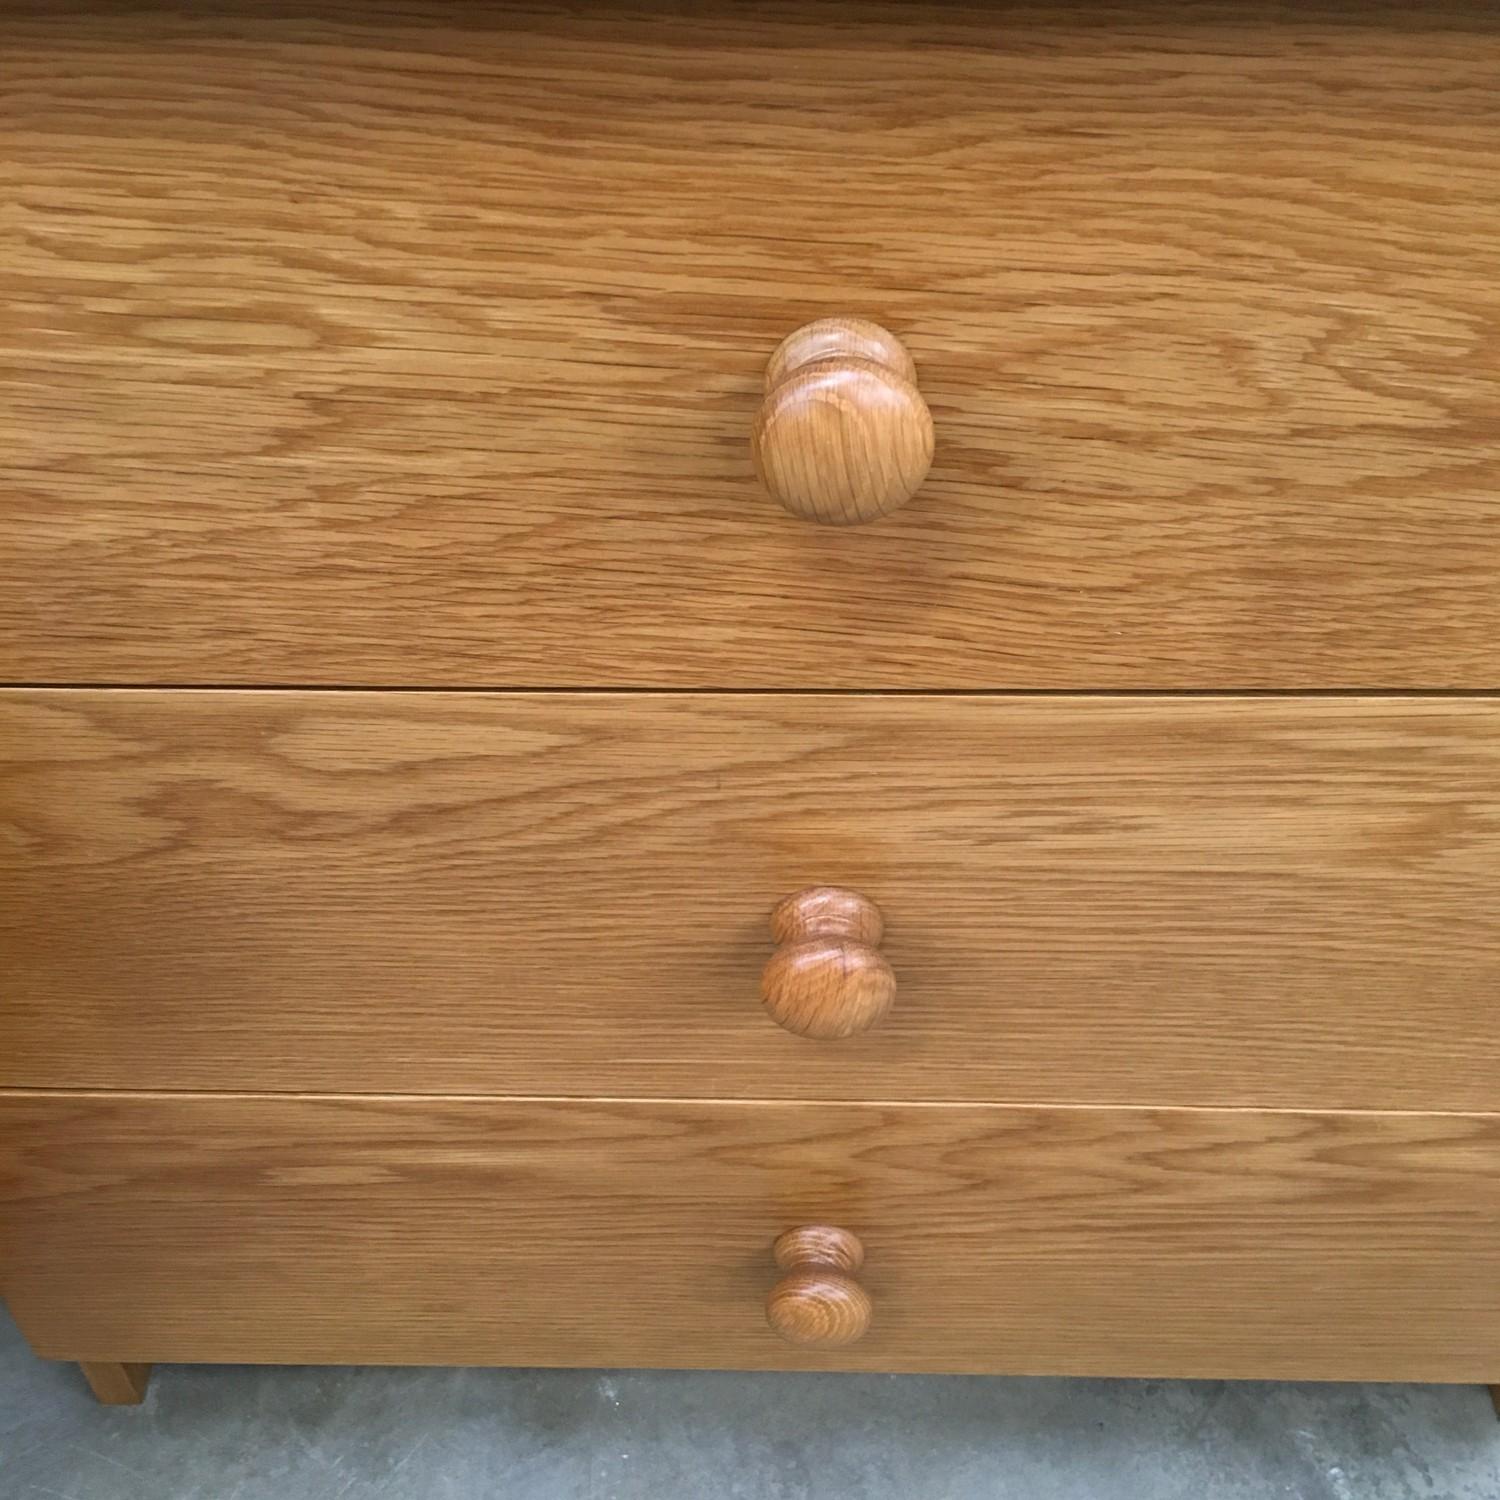 Pair solid oak 3 draw bedroom chest of draws with turned draw knobs ,72x77x44cm each - Image 7 of 7